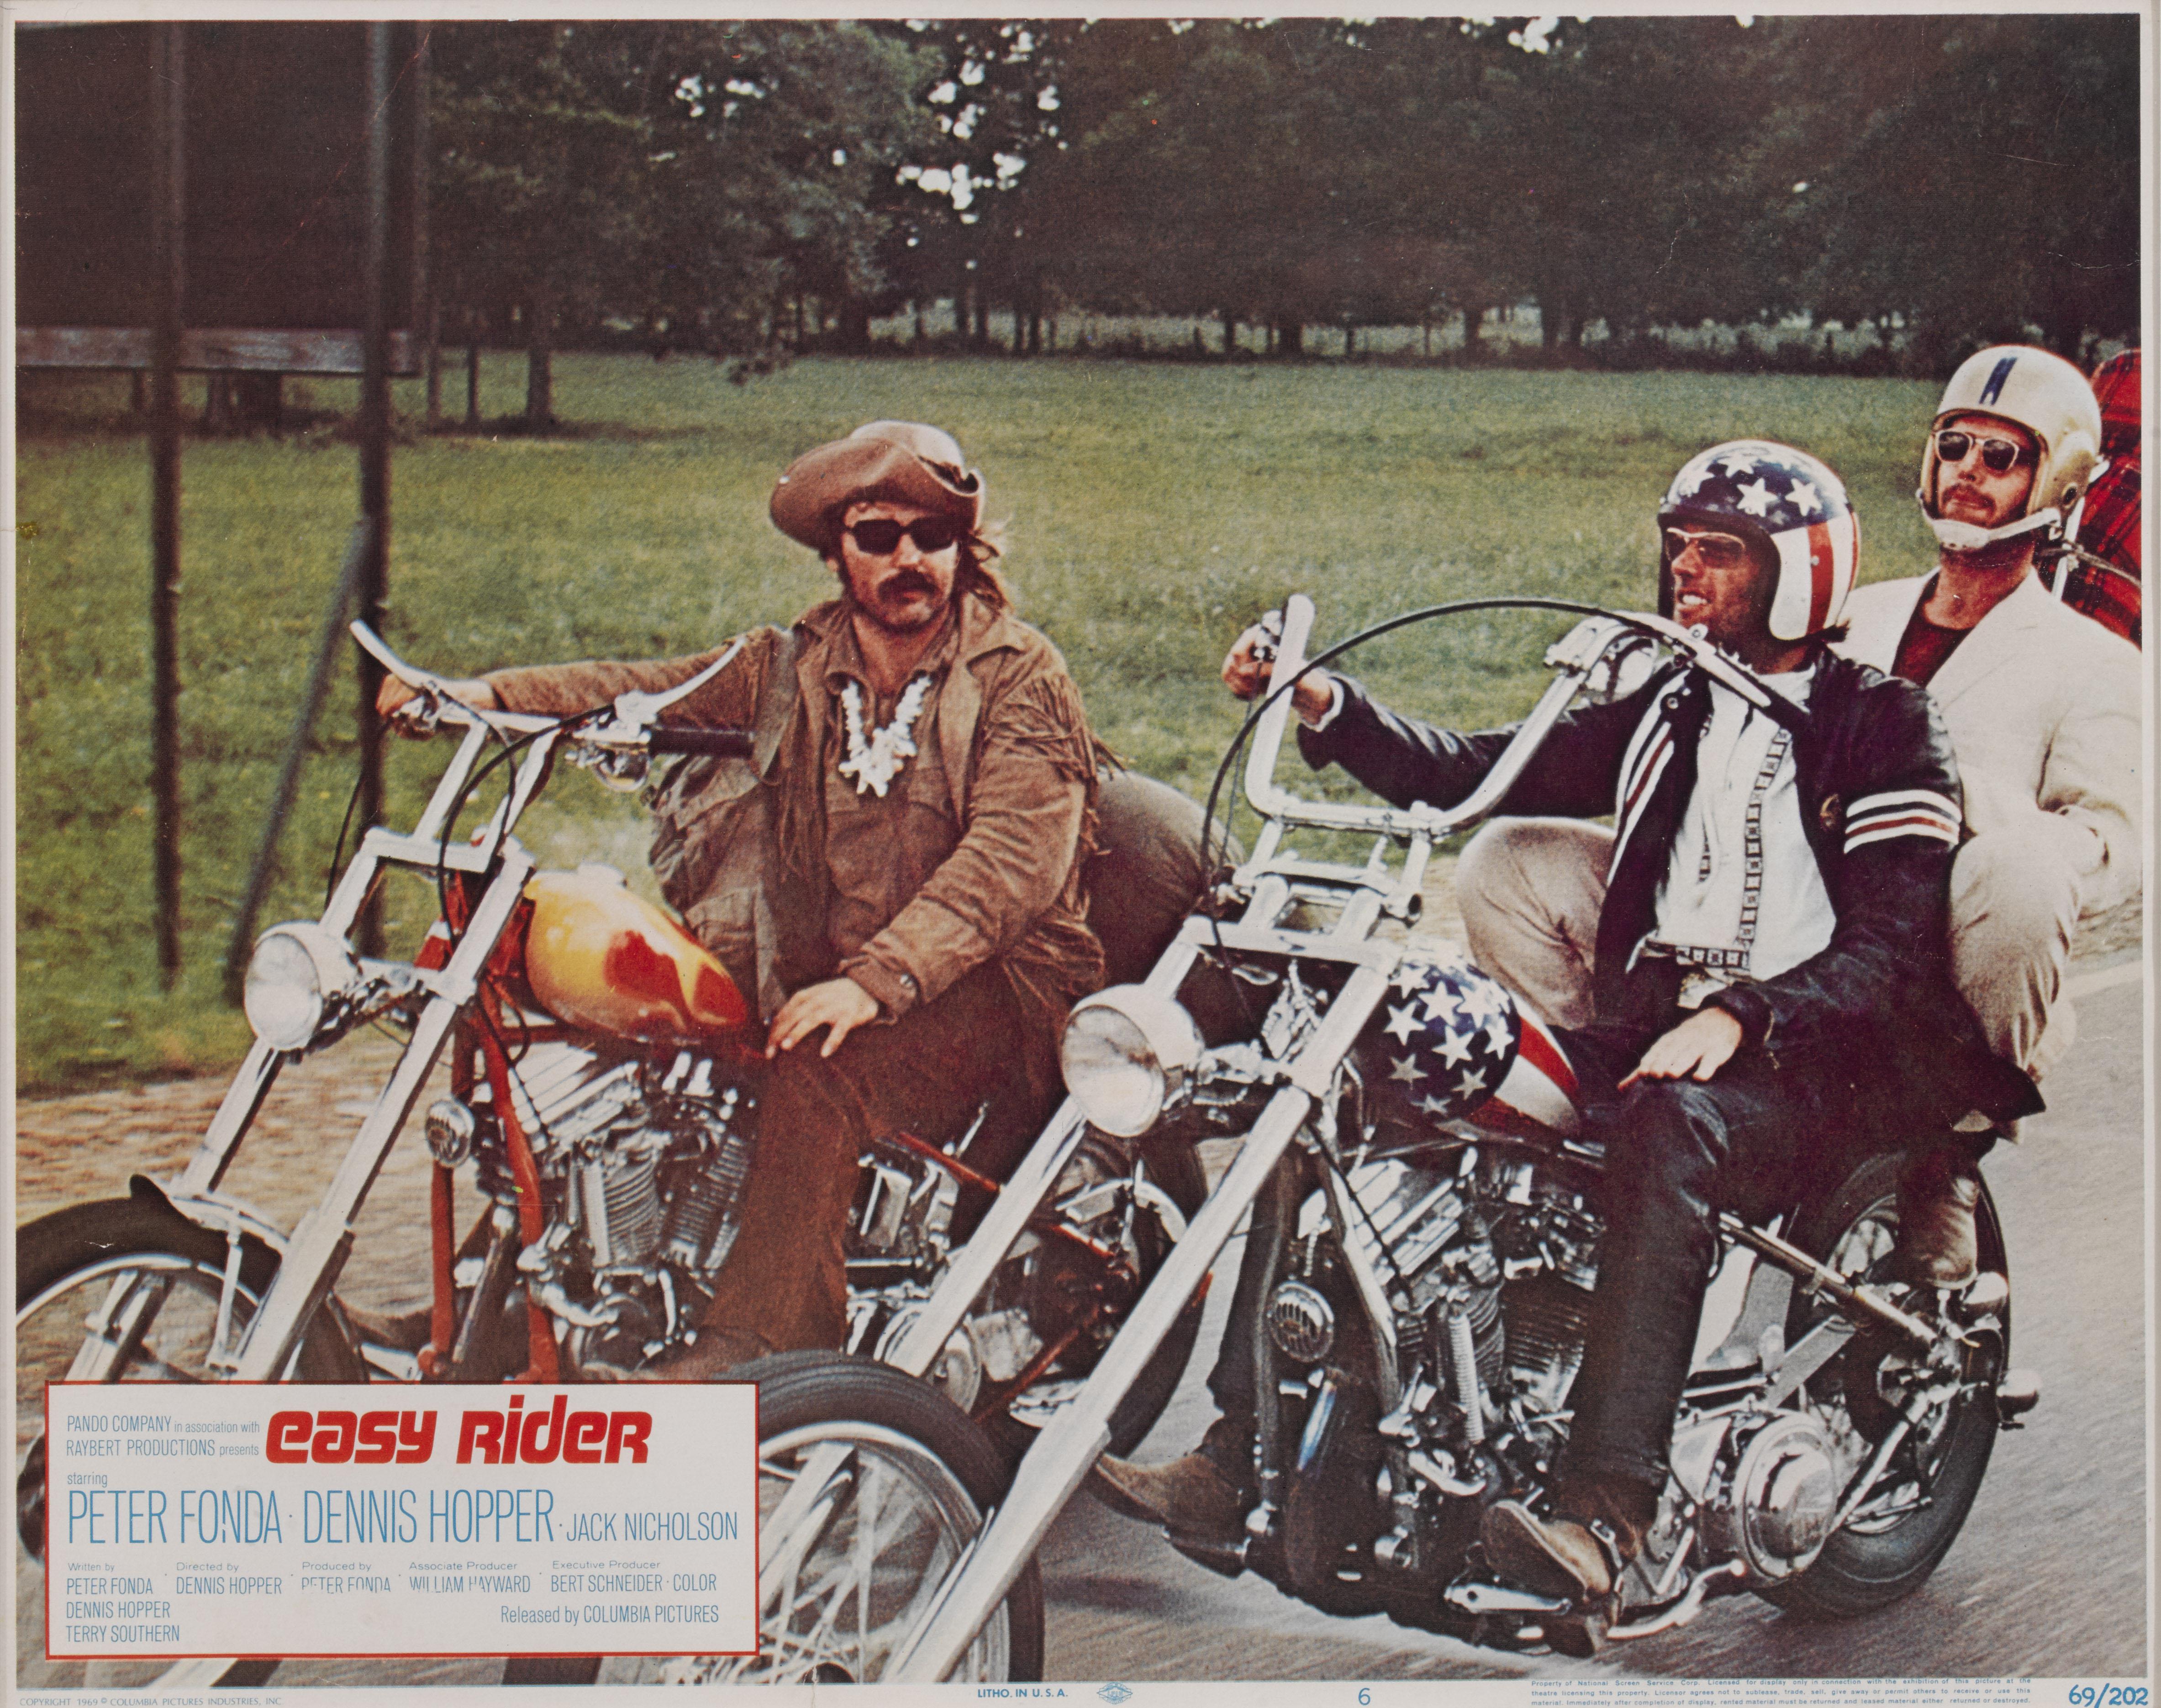 Original US Lobby card,
This is the Best card from the set of 8 lobby cards.
This American road movie was written by Peter Fonda, Dennis Hopper and Terry Southern. It was produced by Fonda and directed by Hopper. This is a landmark film that